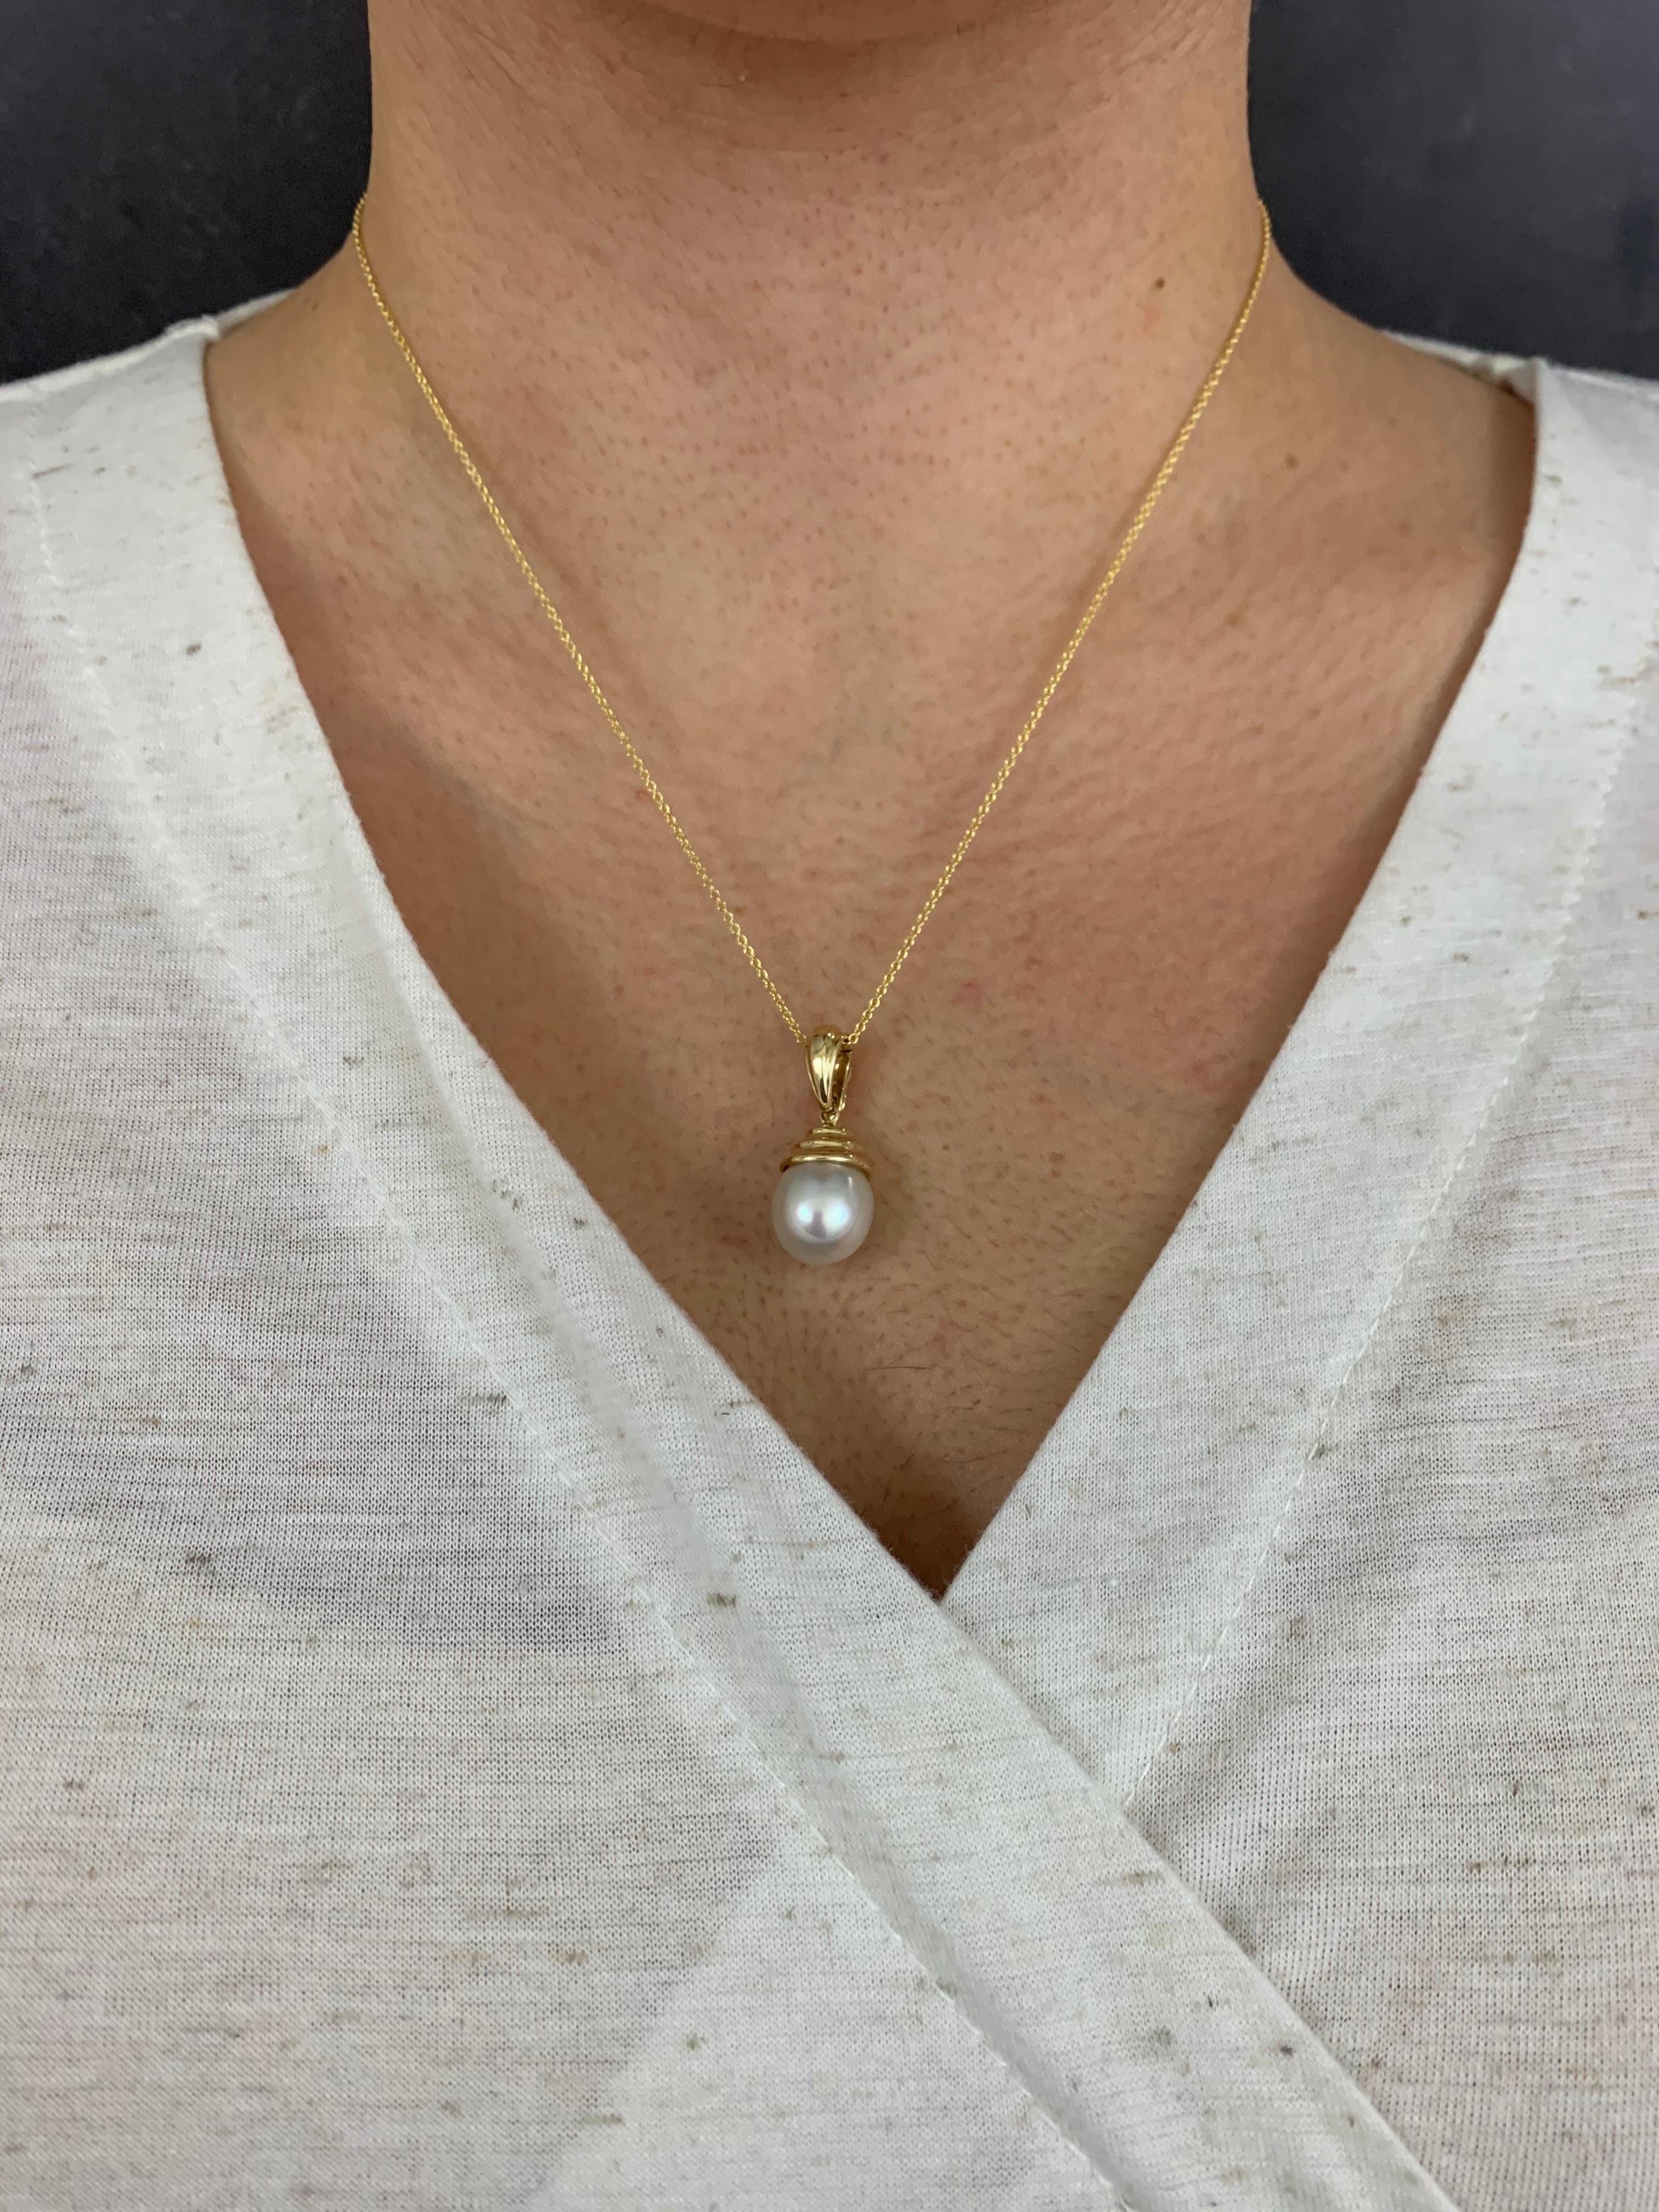 14K Yellow Gold

1 Round South Sea Pearl at 2.75 Carats

Fine one-of-a-kind craftsmanship meets incredible quality in this breathtaking piece of jewelry. 

All pieces are made in the U.S.A and come with a lifetime warranty! 

Undeniably rare,